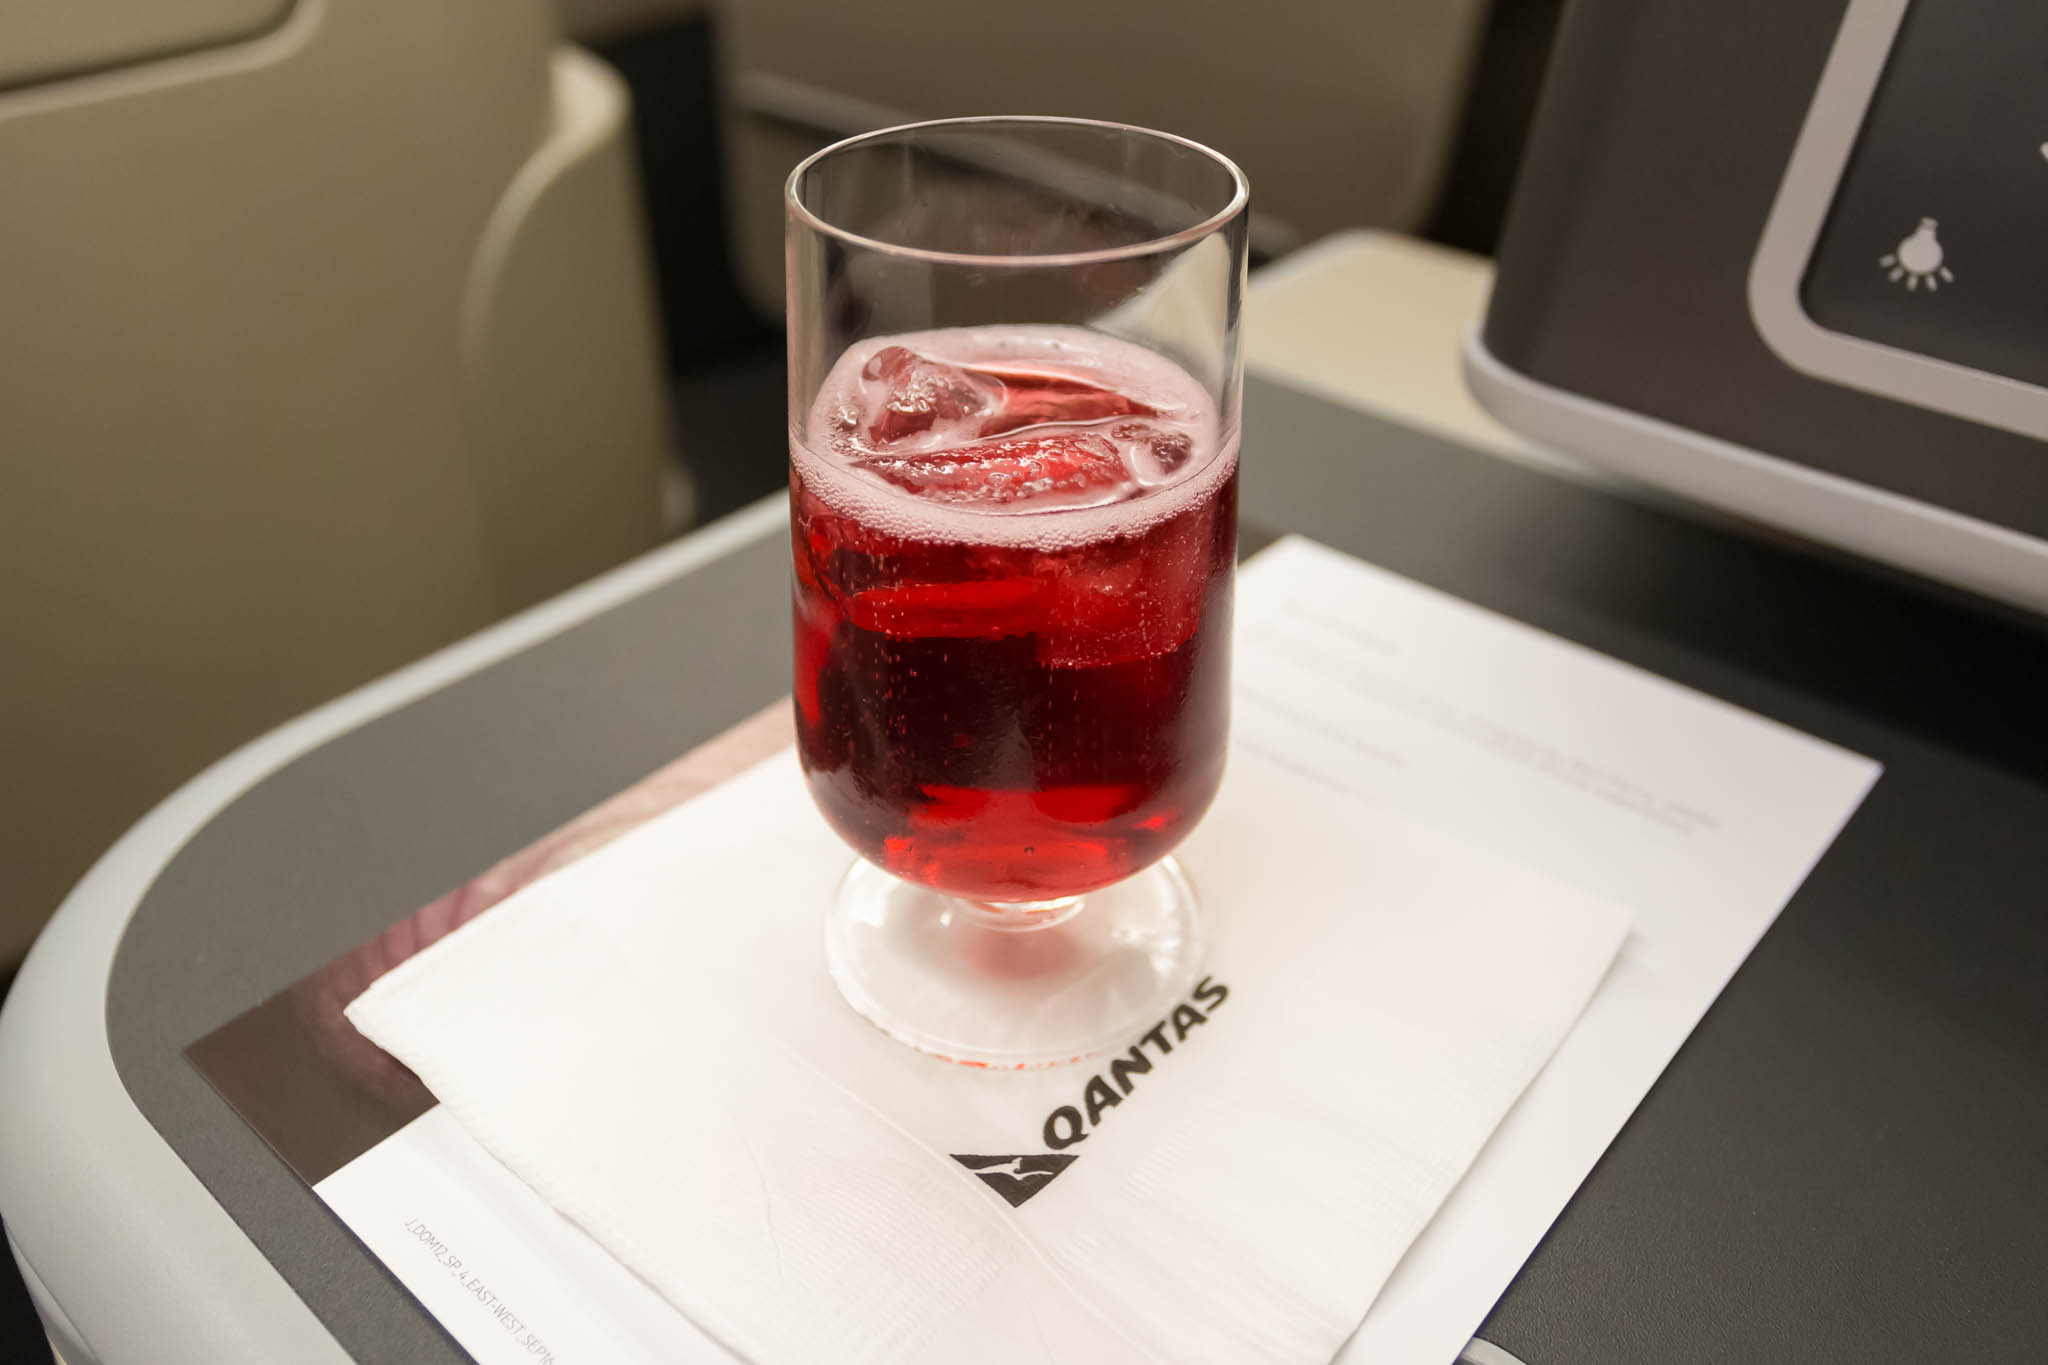 a glass of red liquid on a napkin